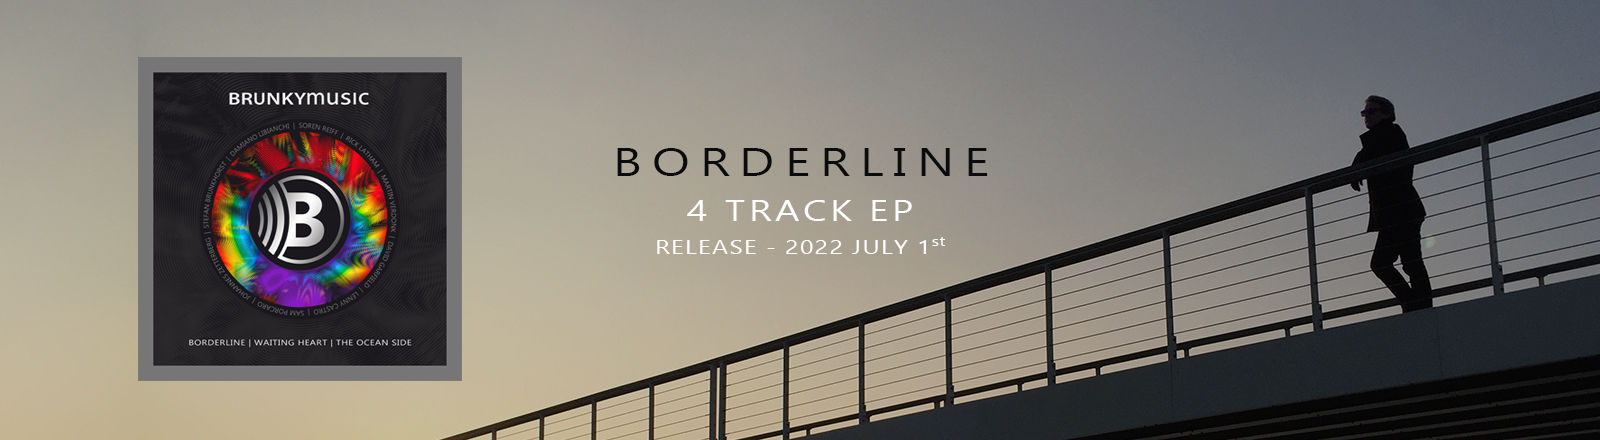 Brunky Music 4-Track EP Borderline Out Now